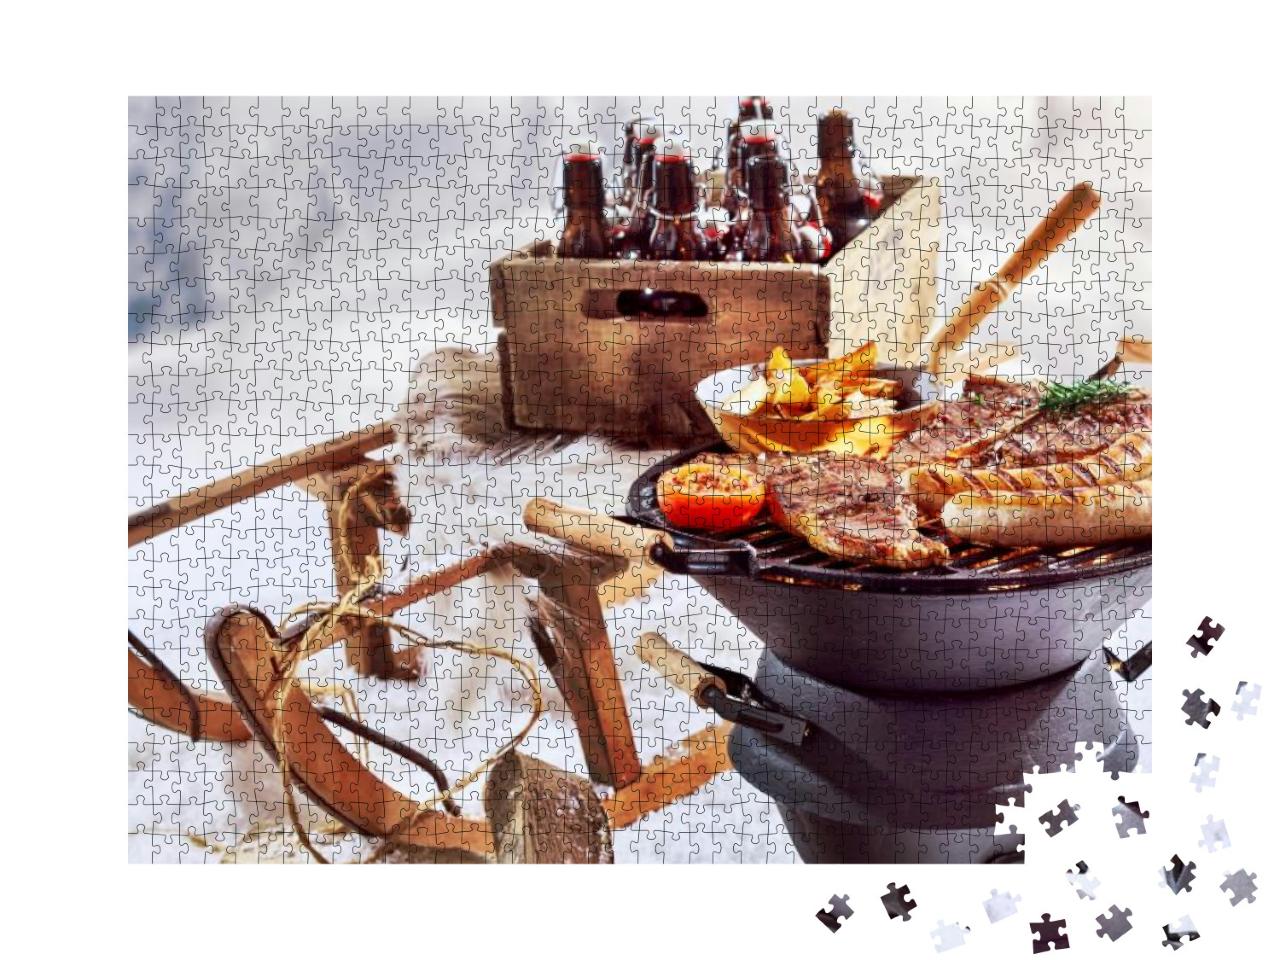 Winter Barbecue Outdoors in the Snow with T-Bone Steaks &... Jigsaw Puzzle with 1000 pieces